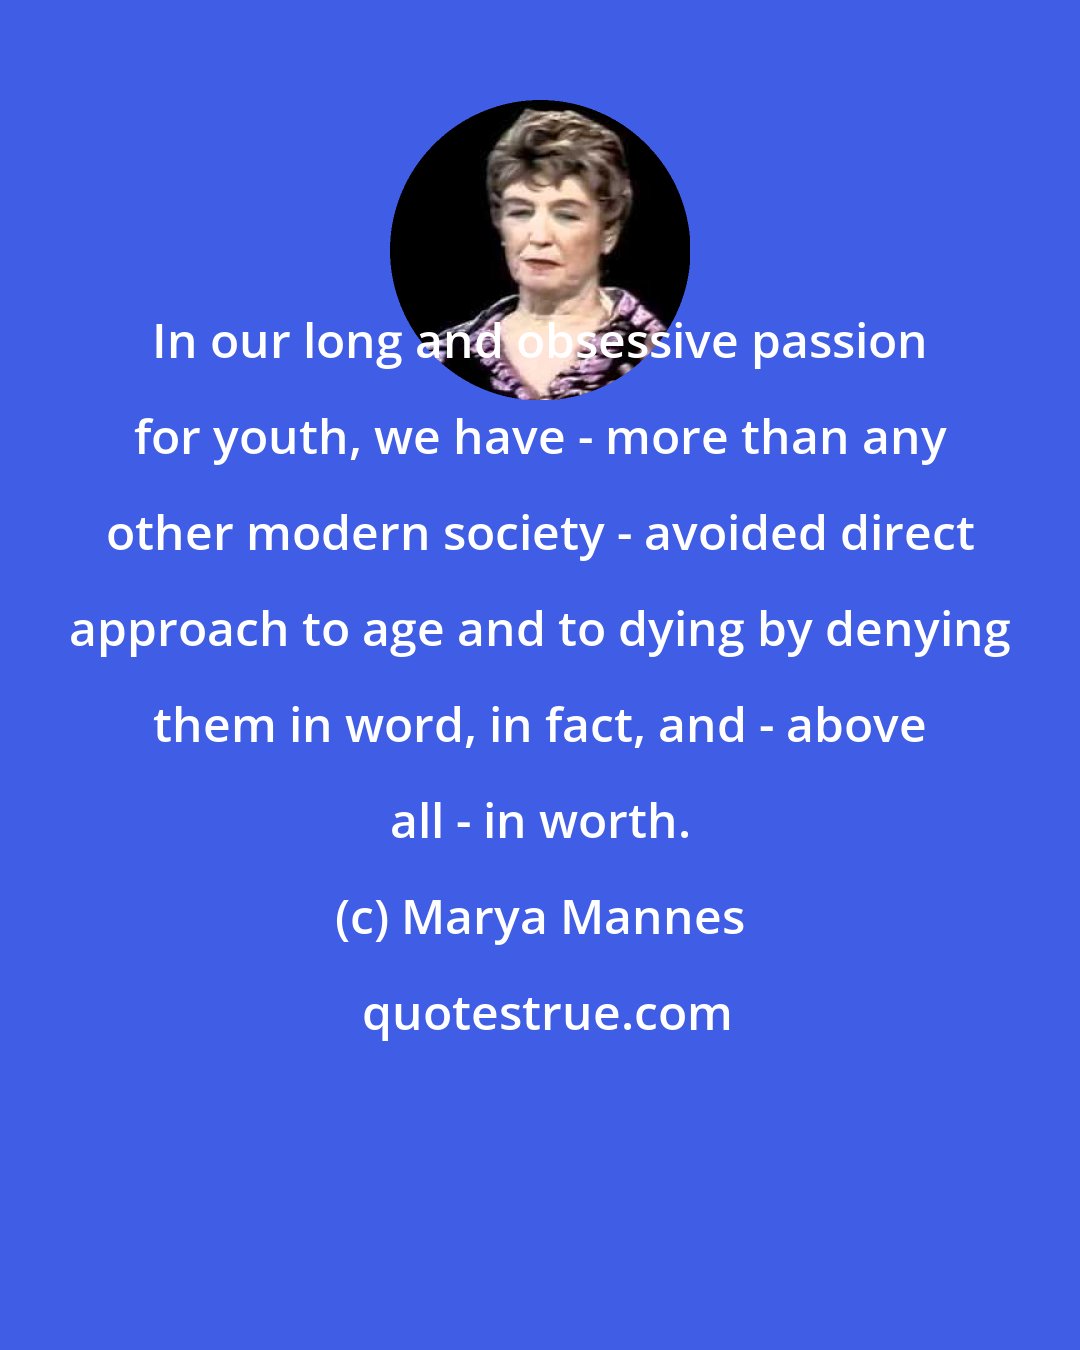 Marya Mannes: In our long and obsessive passion for youth, we have - more than any other modern society - avoided direct approach to age and to dying by denying them in word, in fact, and - above all - in worth.